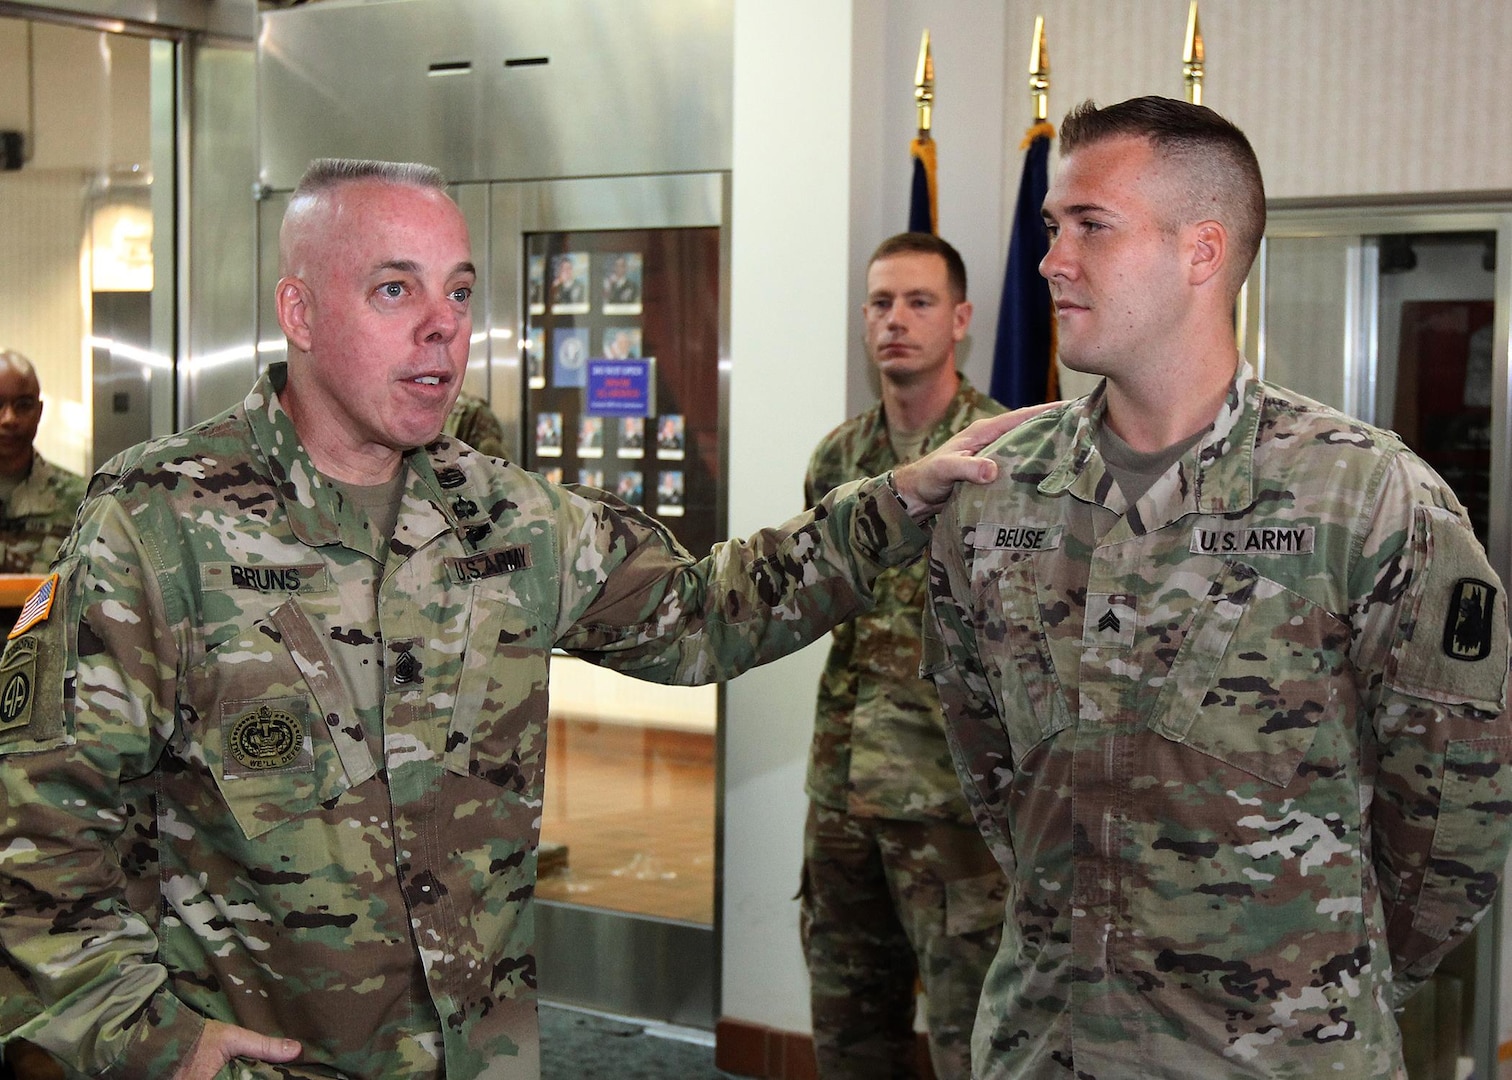 Command Sgt. Maj. William Bruns, the U.S. Army Cyber Command command sergeant major (left), congratulates Sgt. Kevin Beuse of Colorado Springs, Colo., assigned to Headquarters & Headquarters Company, 470th Military Intelligence Brigade, U.S. Army Intelligence and Security Command, Joint Base San Antonio-Fort Sam Houston, for earning the title of 2017 ARCYBER Best Warrior Non-commissioned Officer of the Year, at an award ceremony in the command’s headquarters at Fort Belvoir, Va., Aug. 25. Beuse will represent ARCYBER at the Army-level BWC in October.